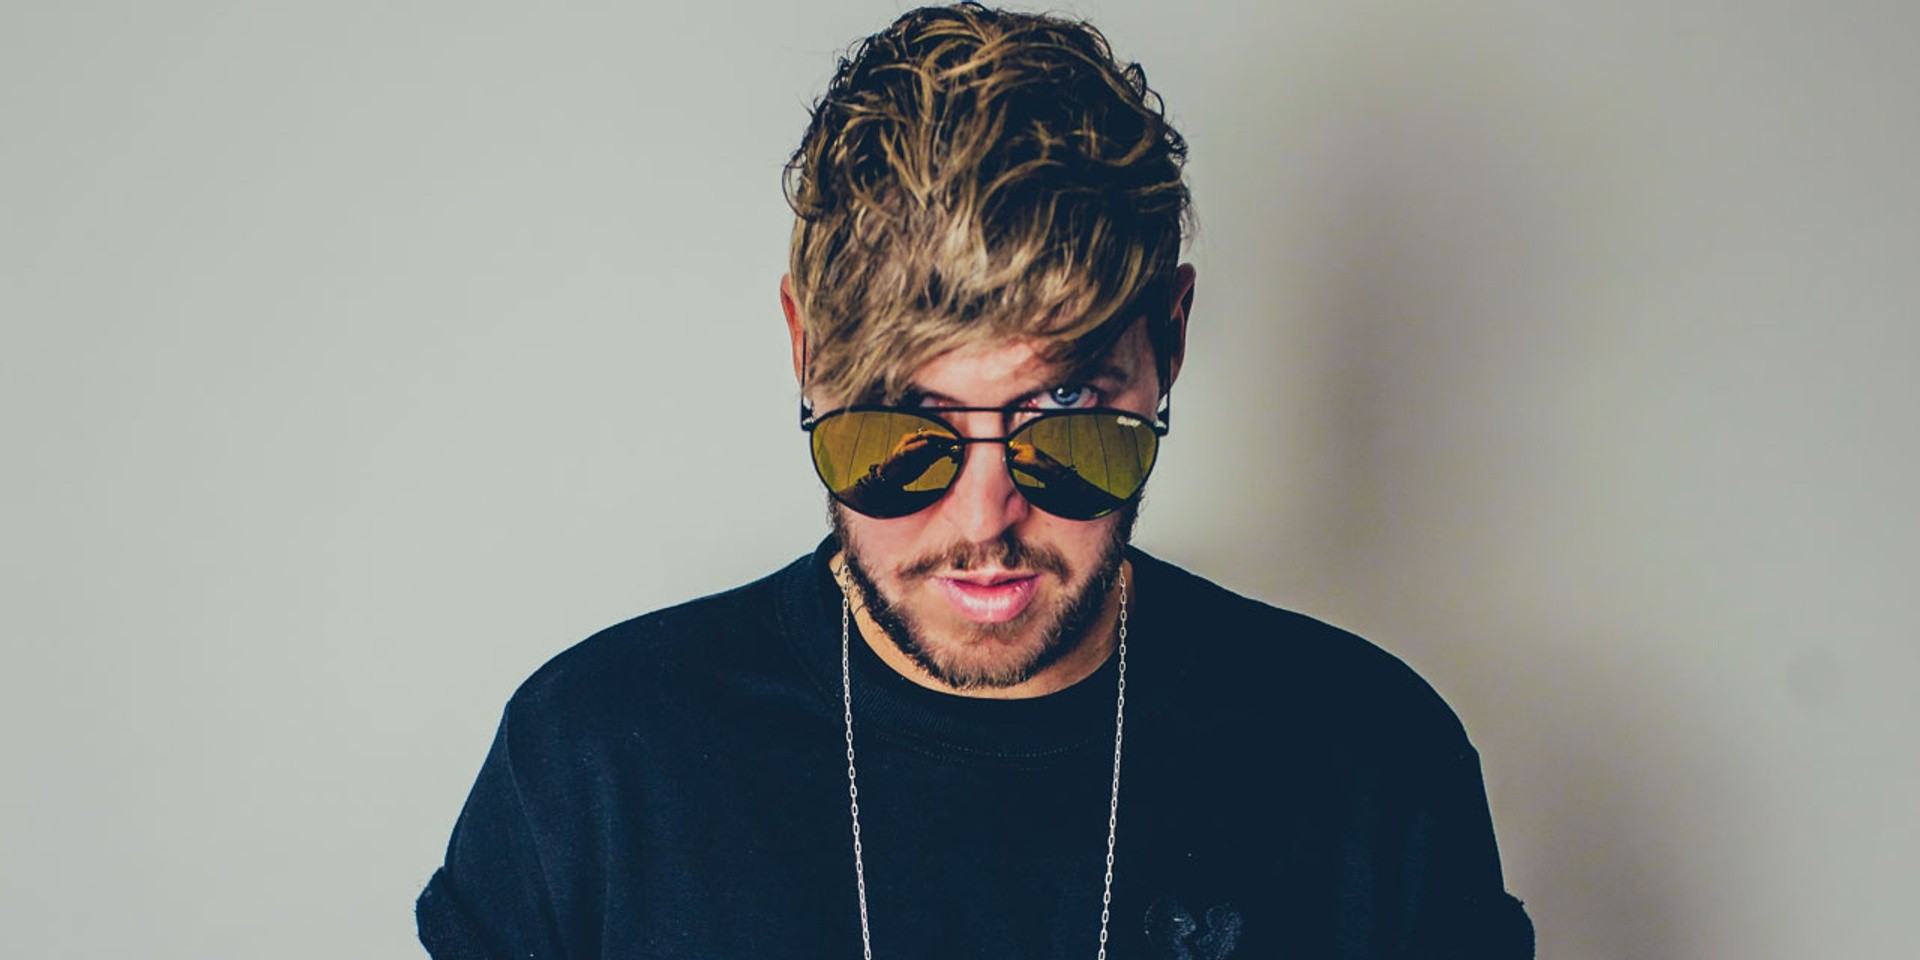 "I've done this for so long, it's all I know": An interview with Ben Nicky